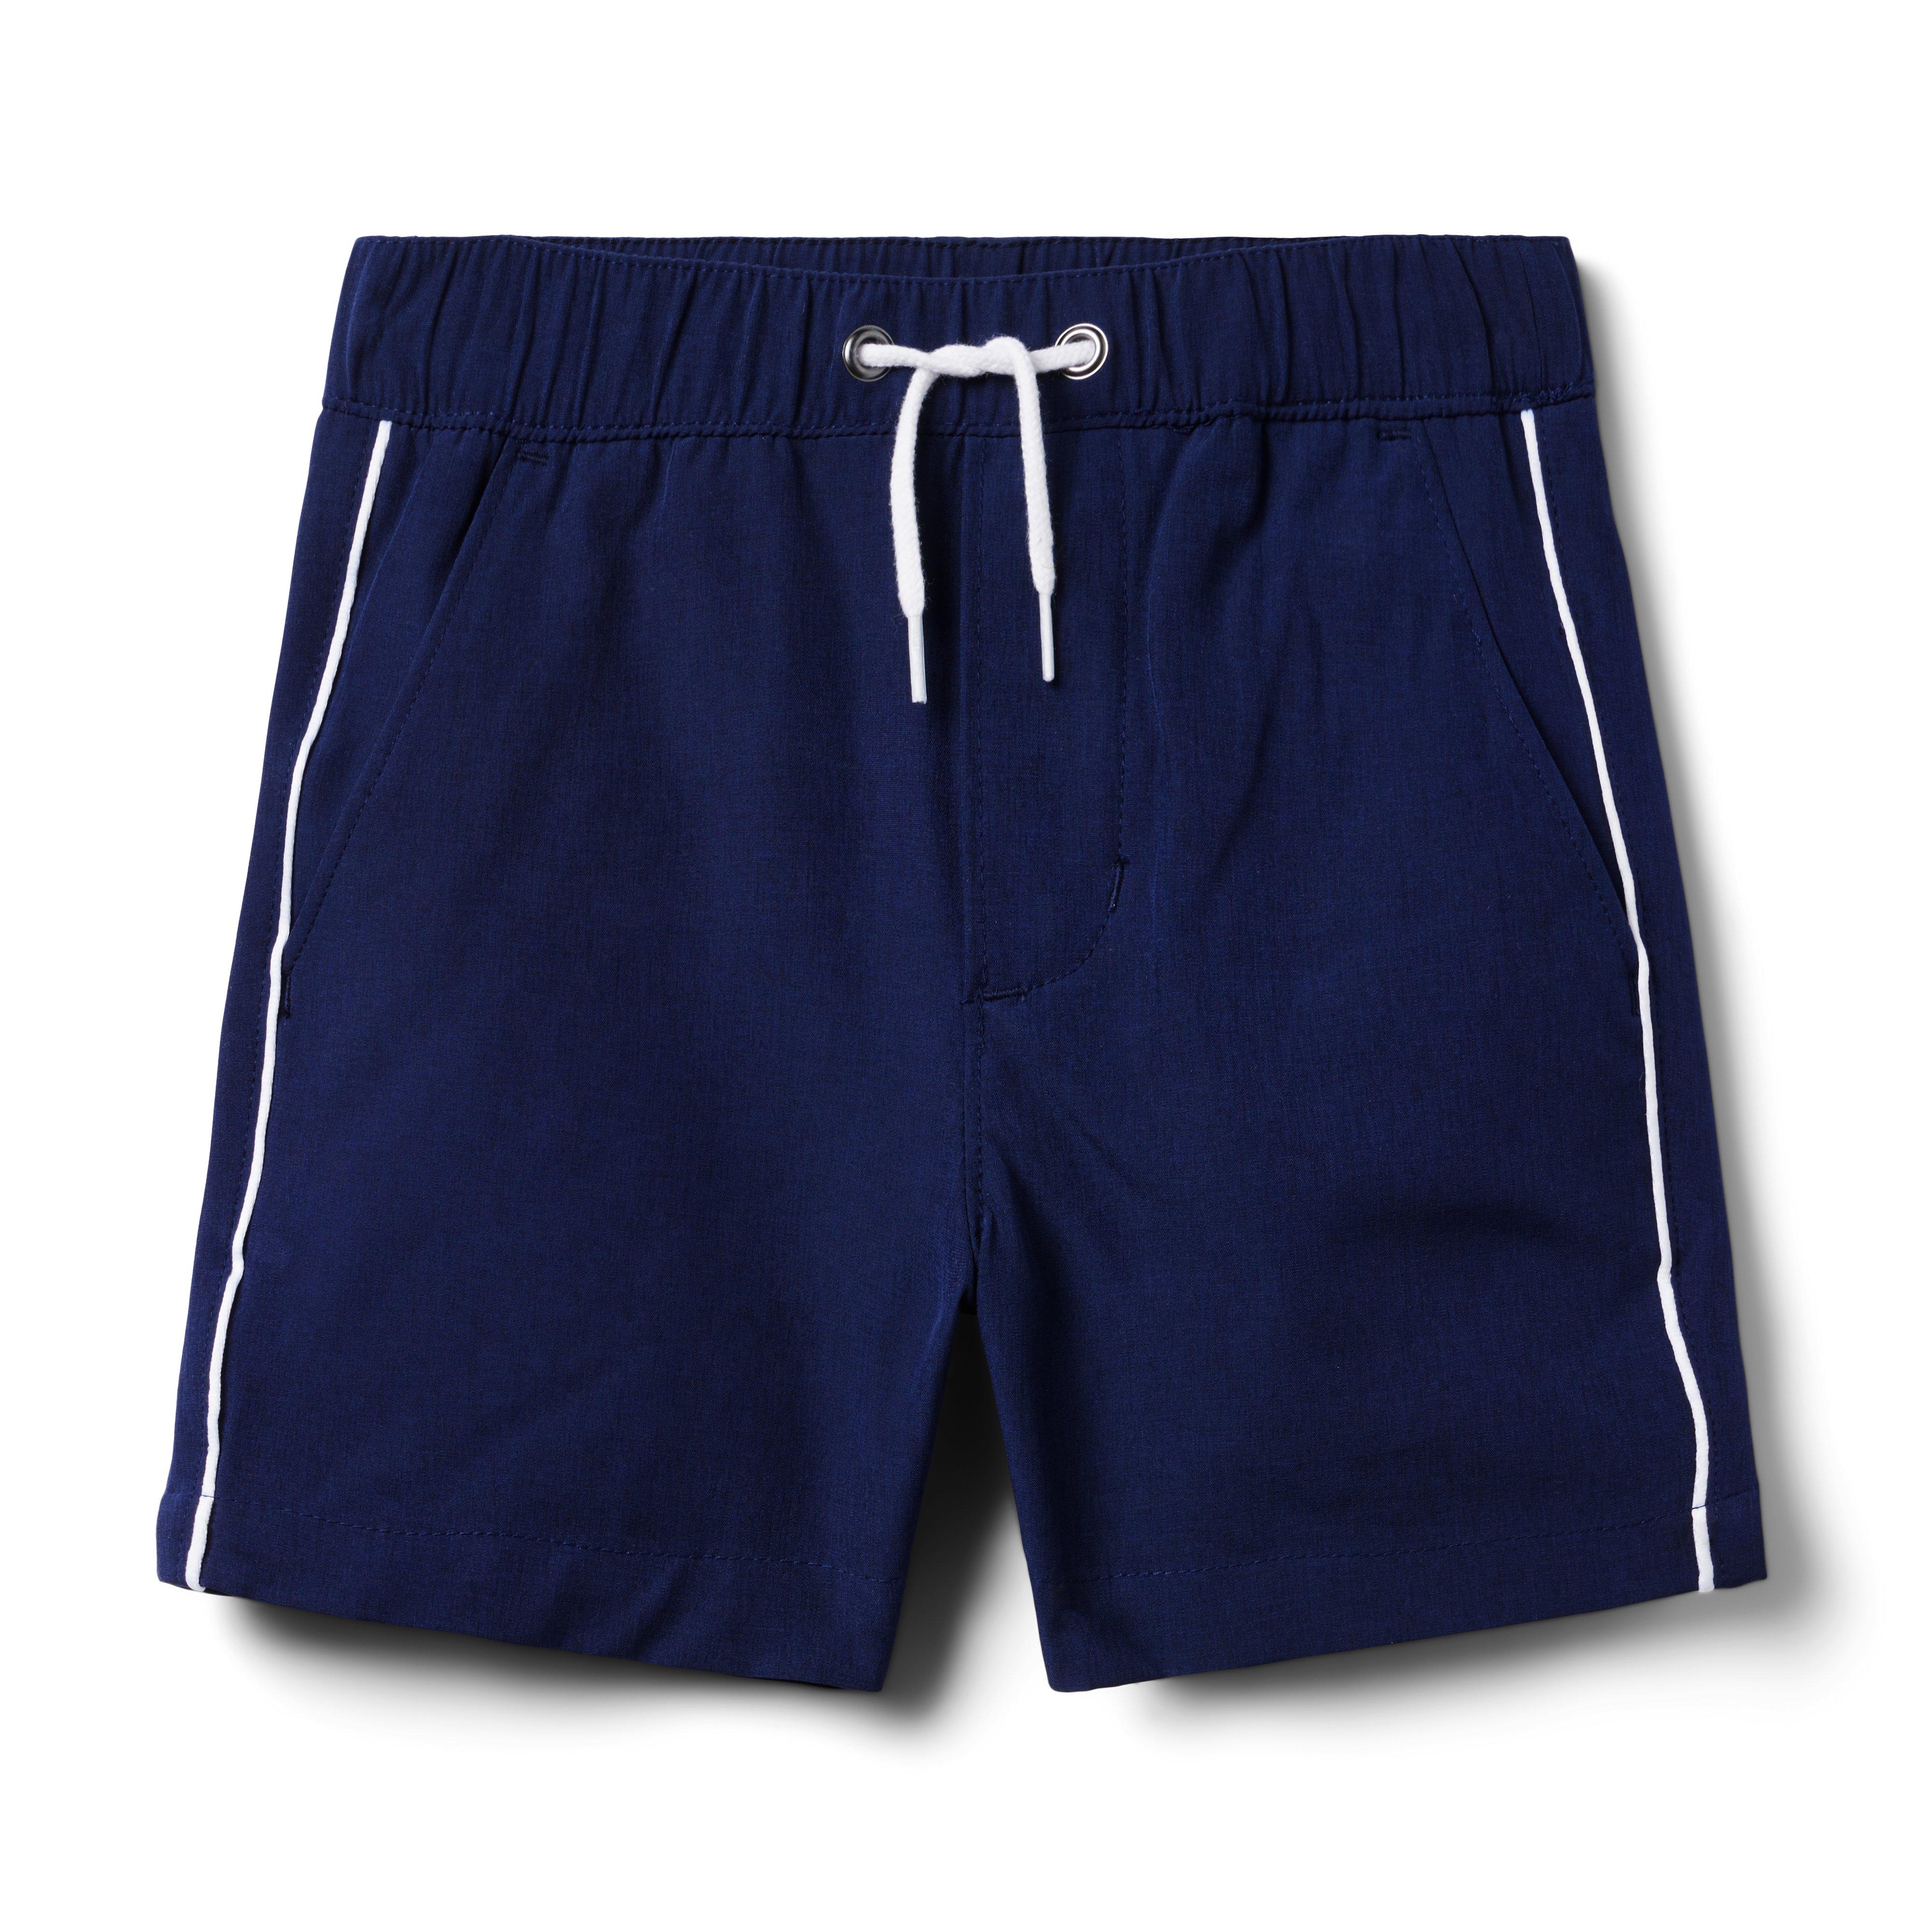 The Pull-On Quick Dry Short